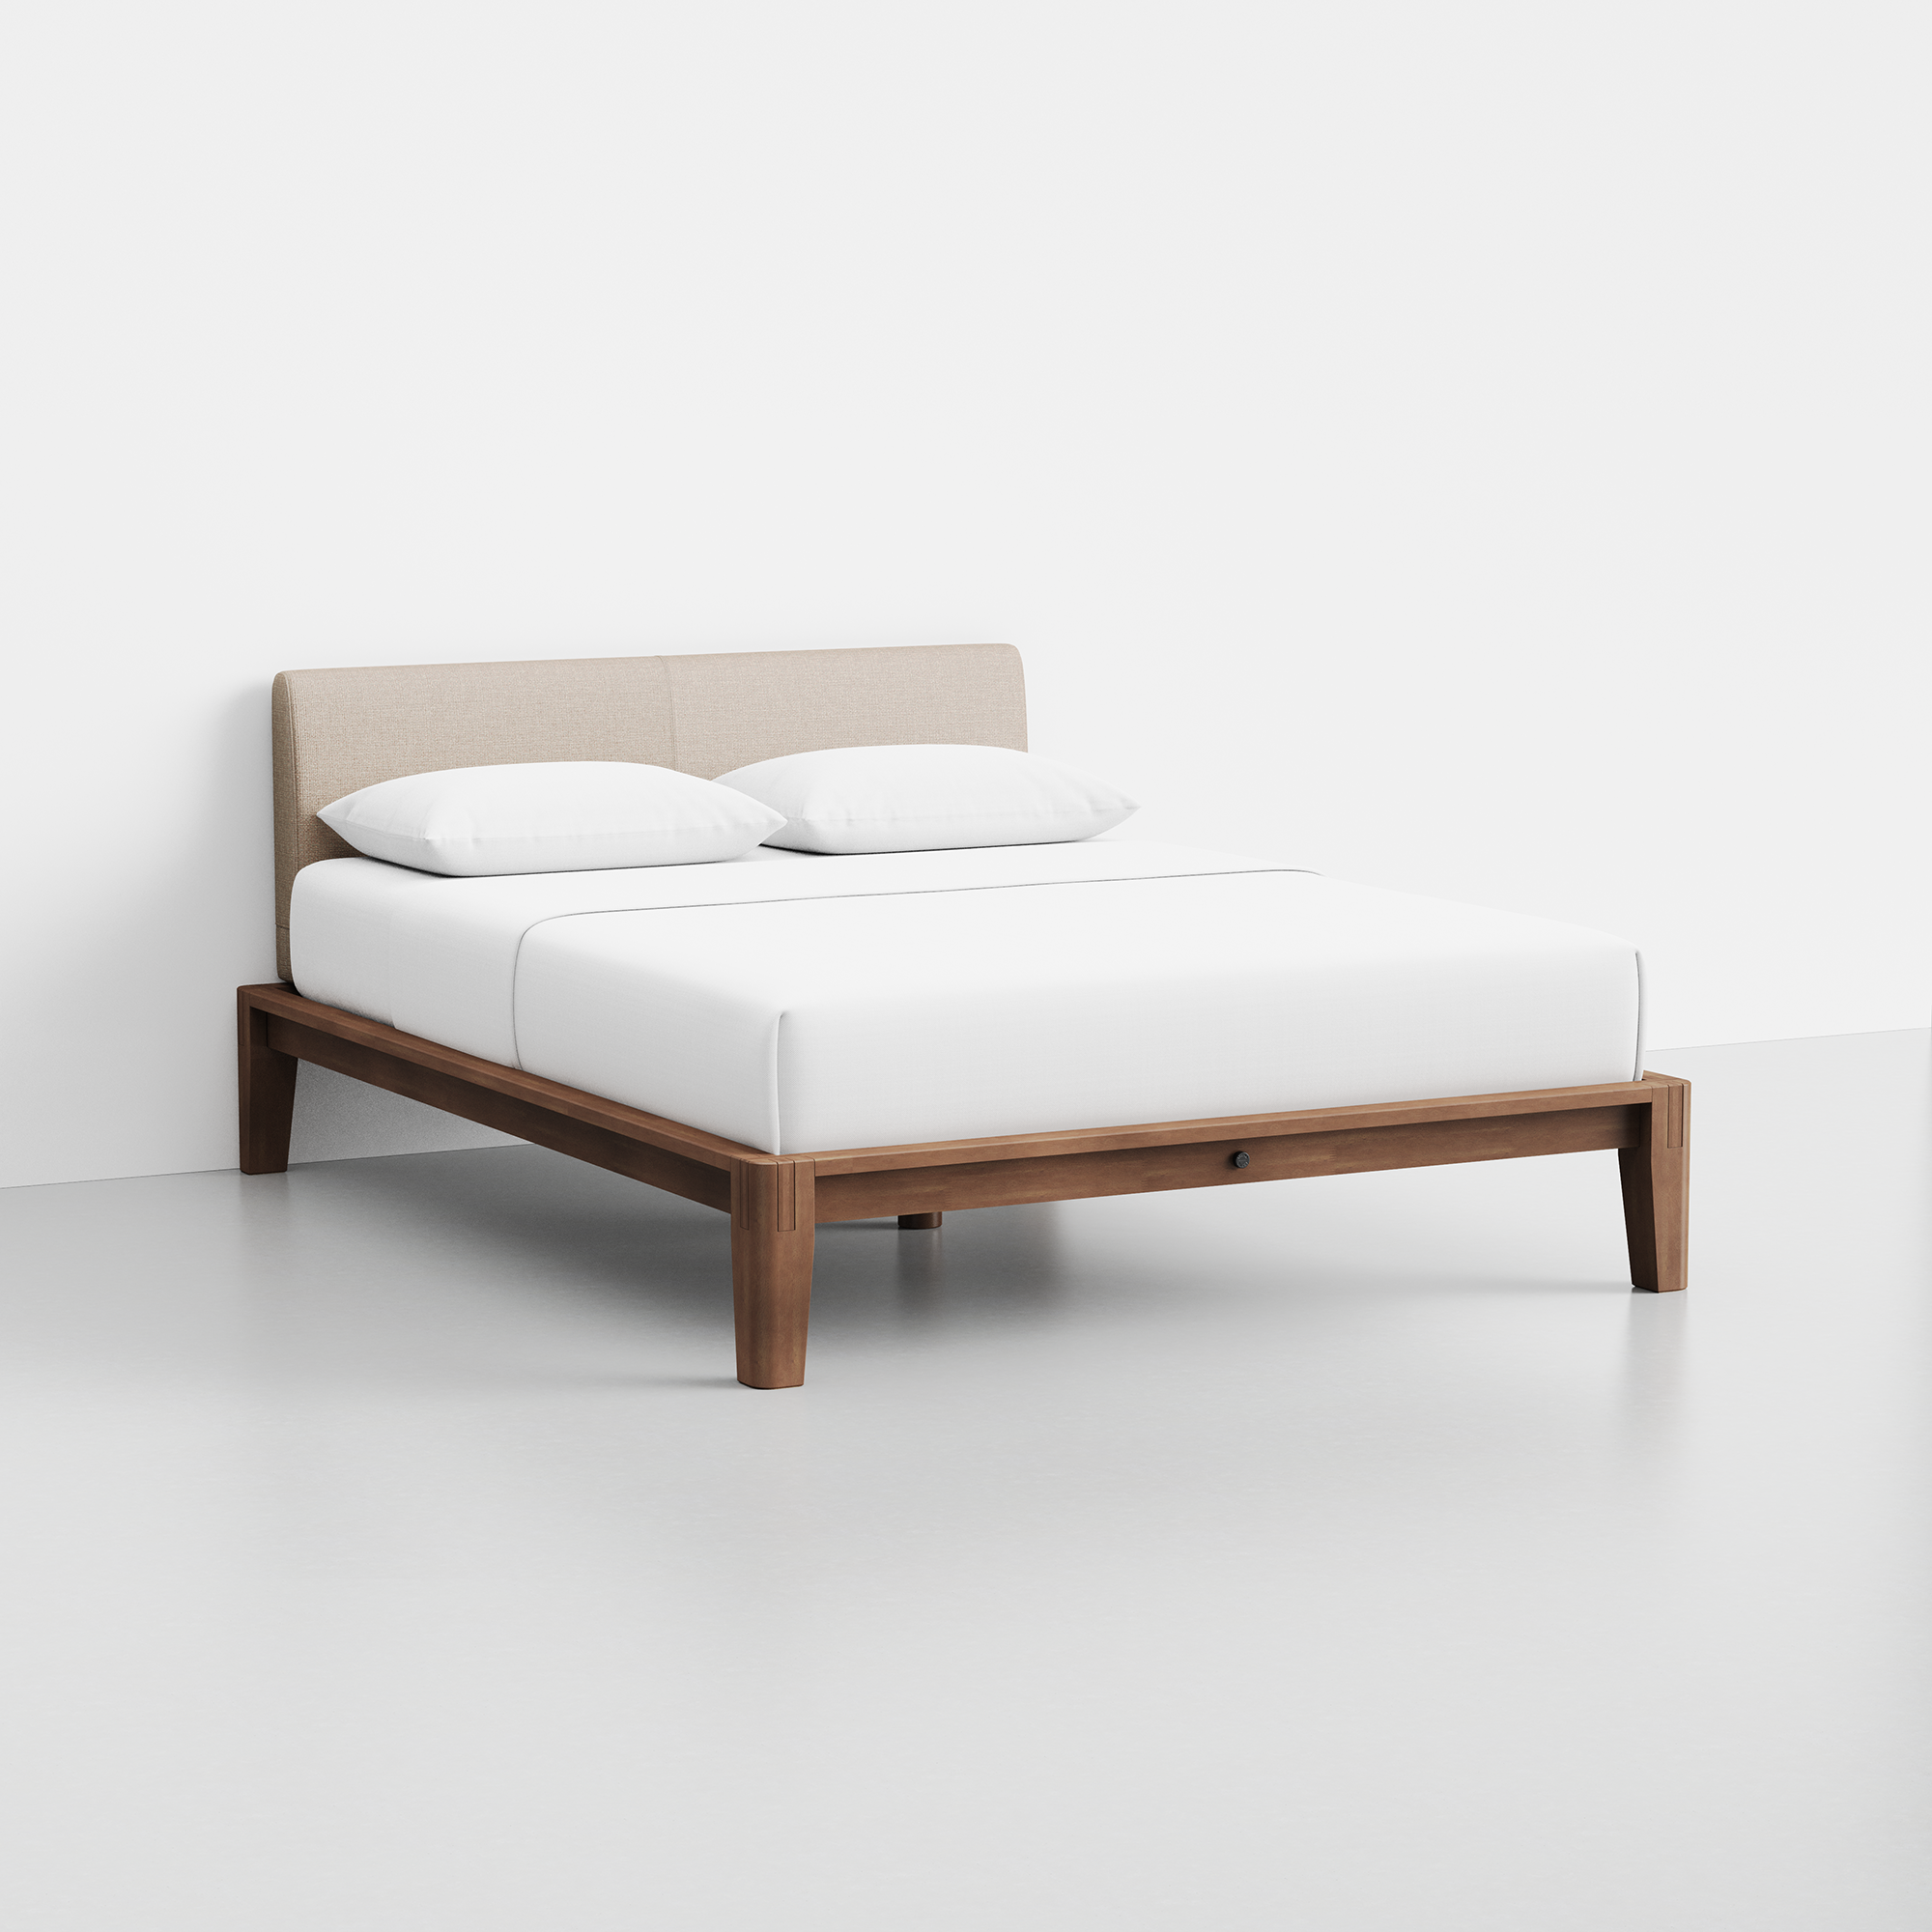 The Bed (Walnut / Dune) - Render - Angled